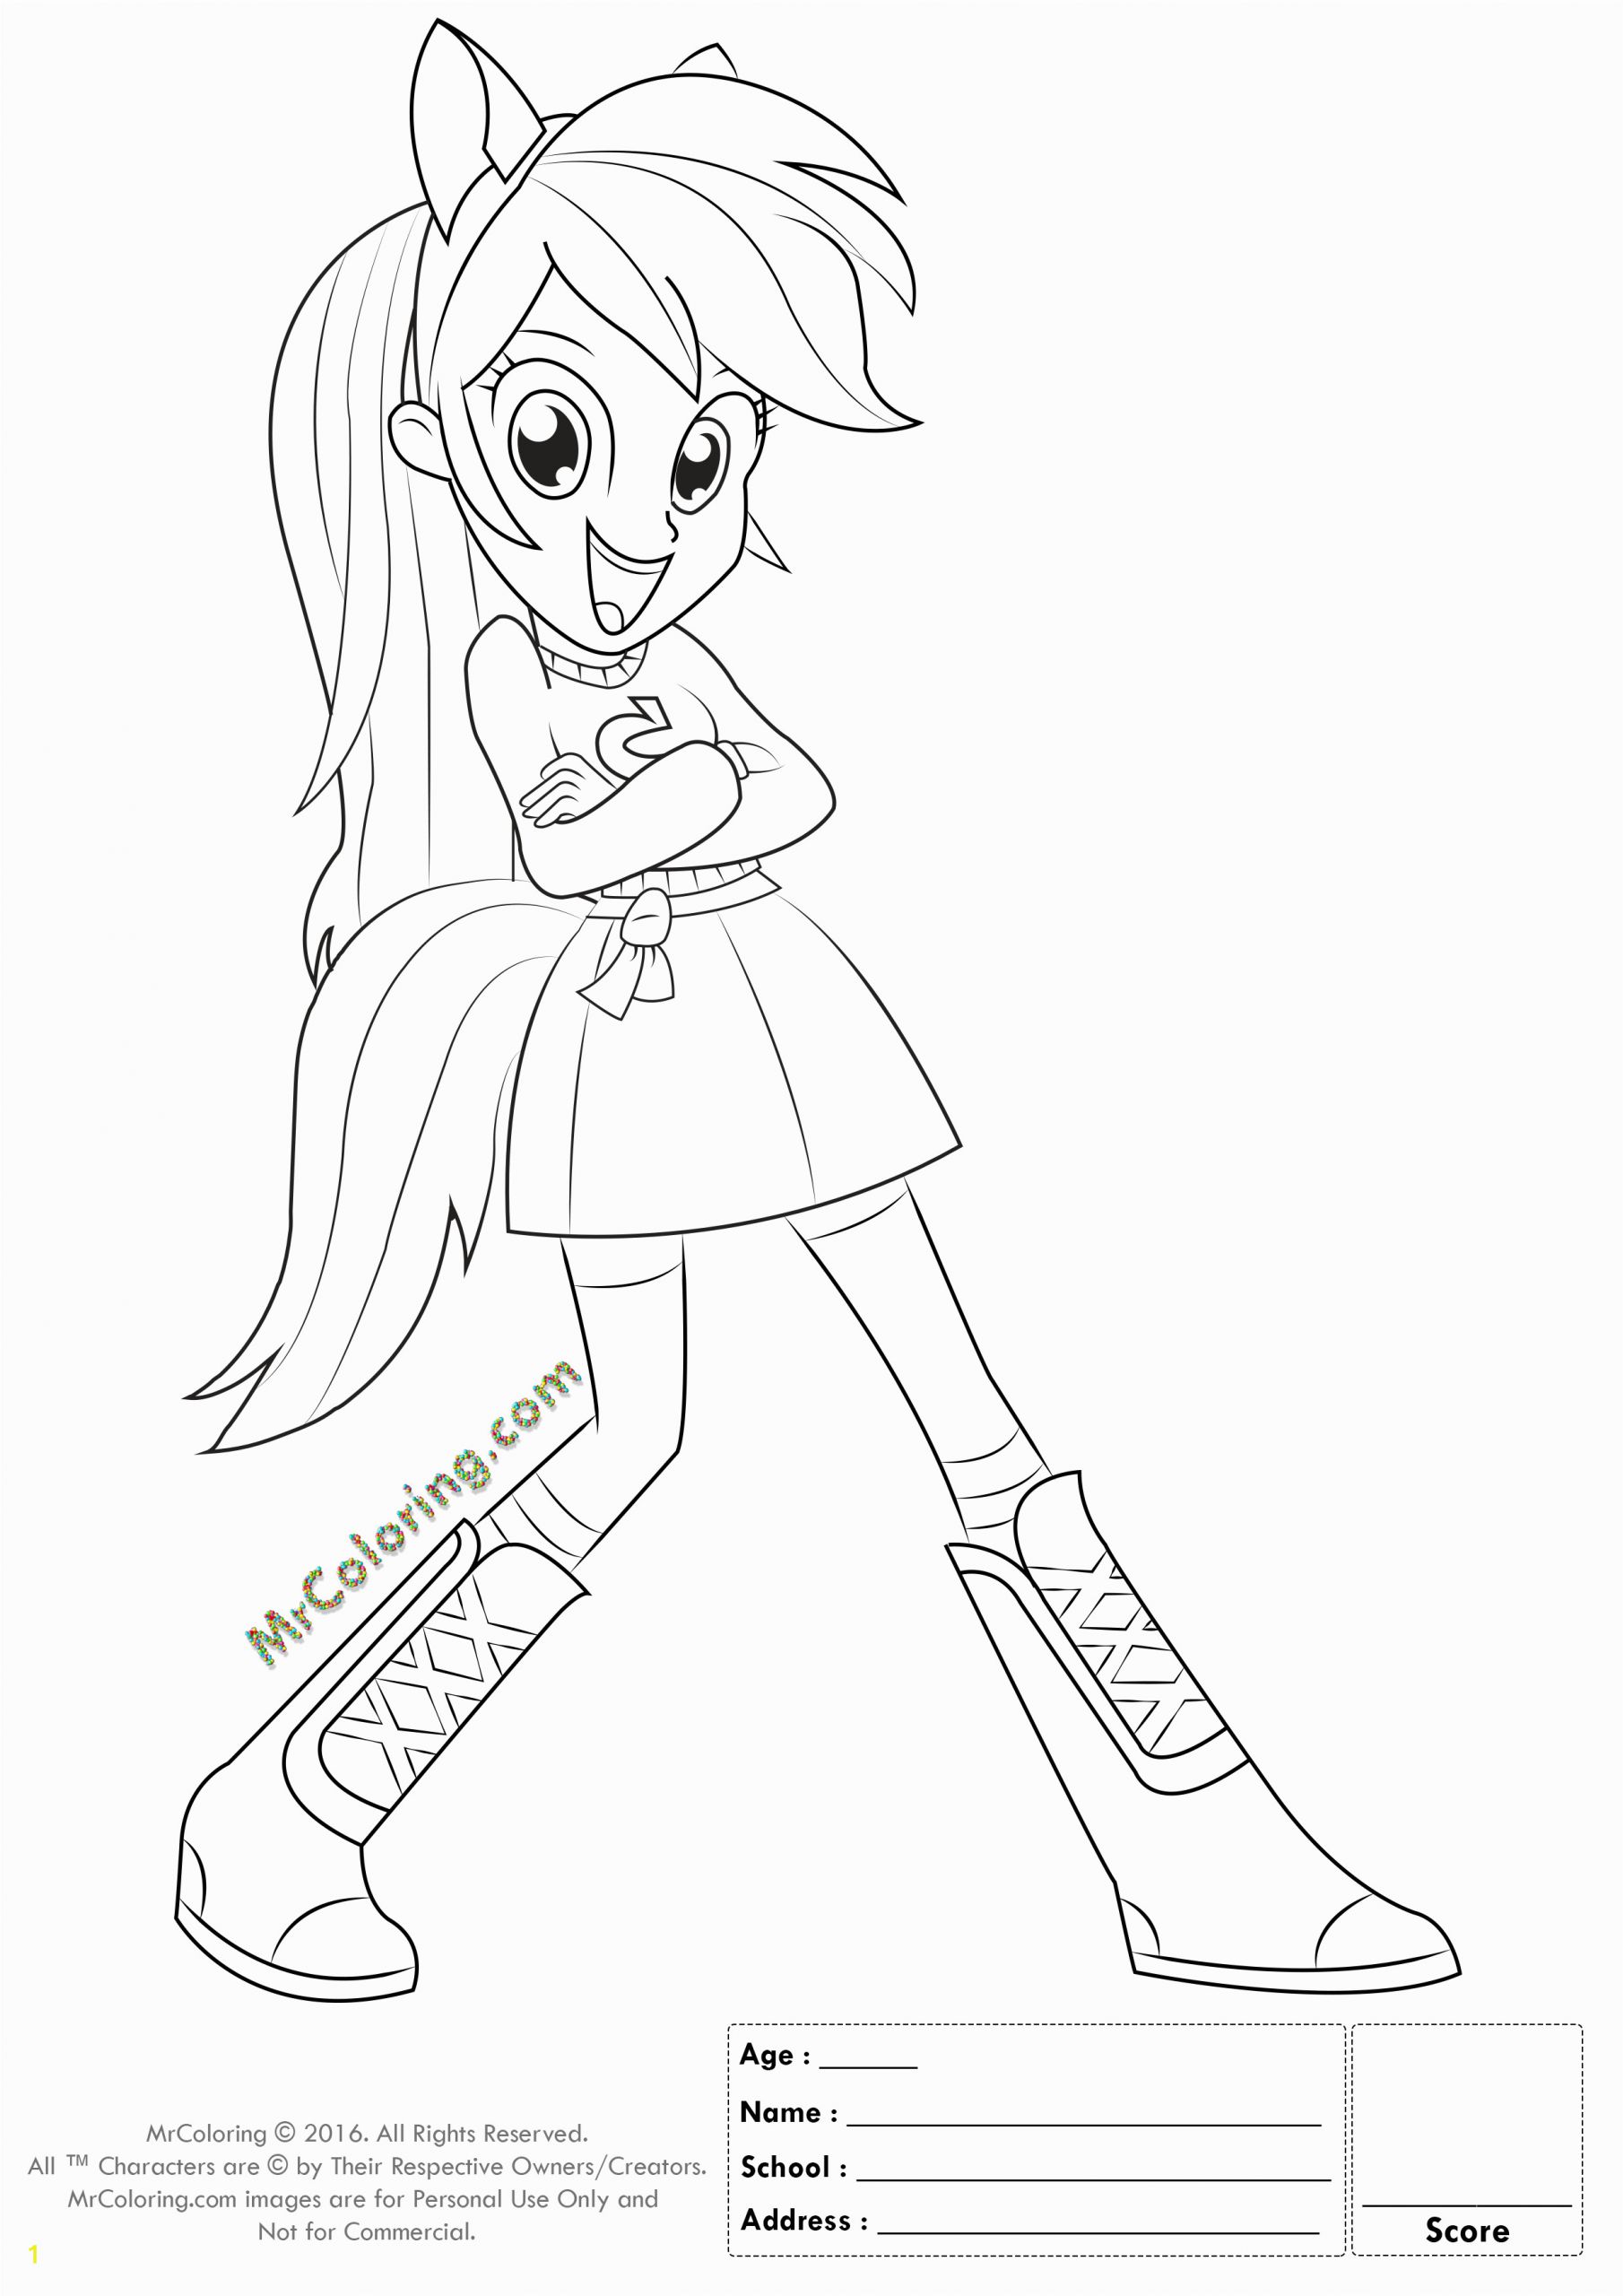 My Little Pony Coloring Pages Rainbow Dash Equestria Girls Mlp Rainbow Dash Equestria Girls Coloring Pages 3